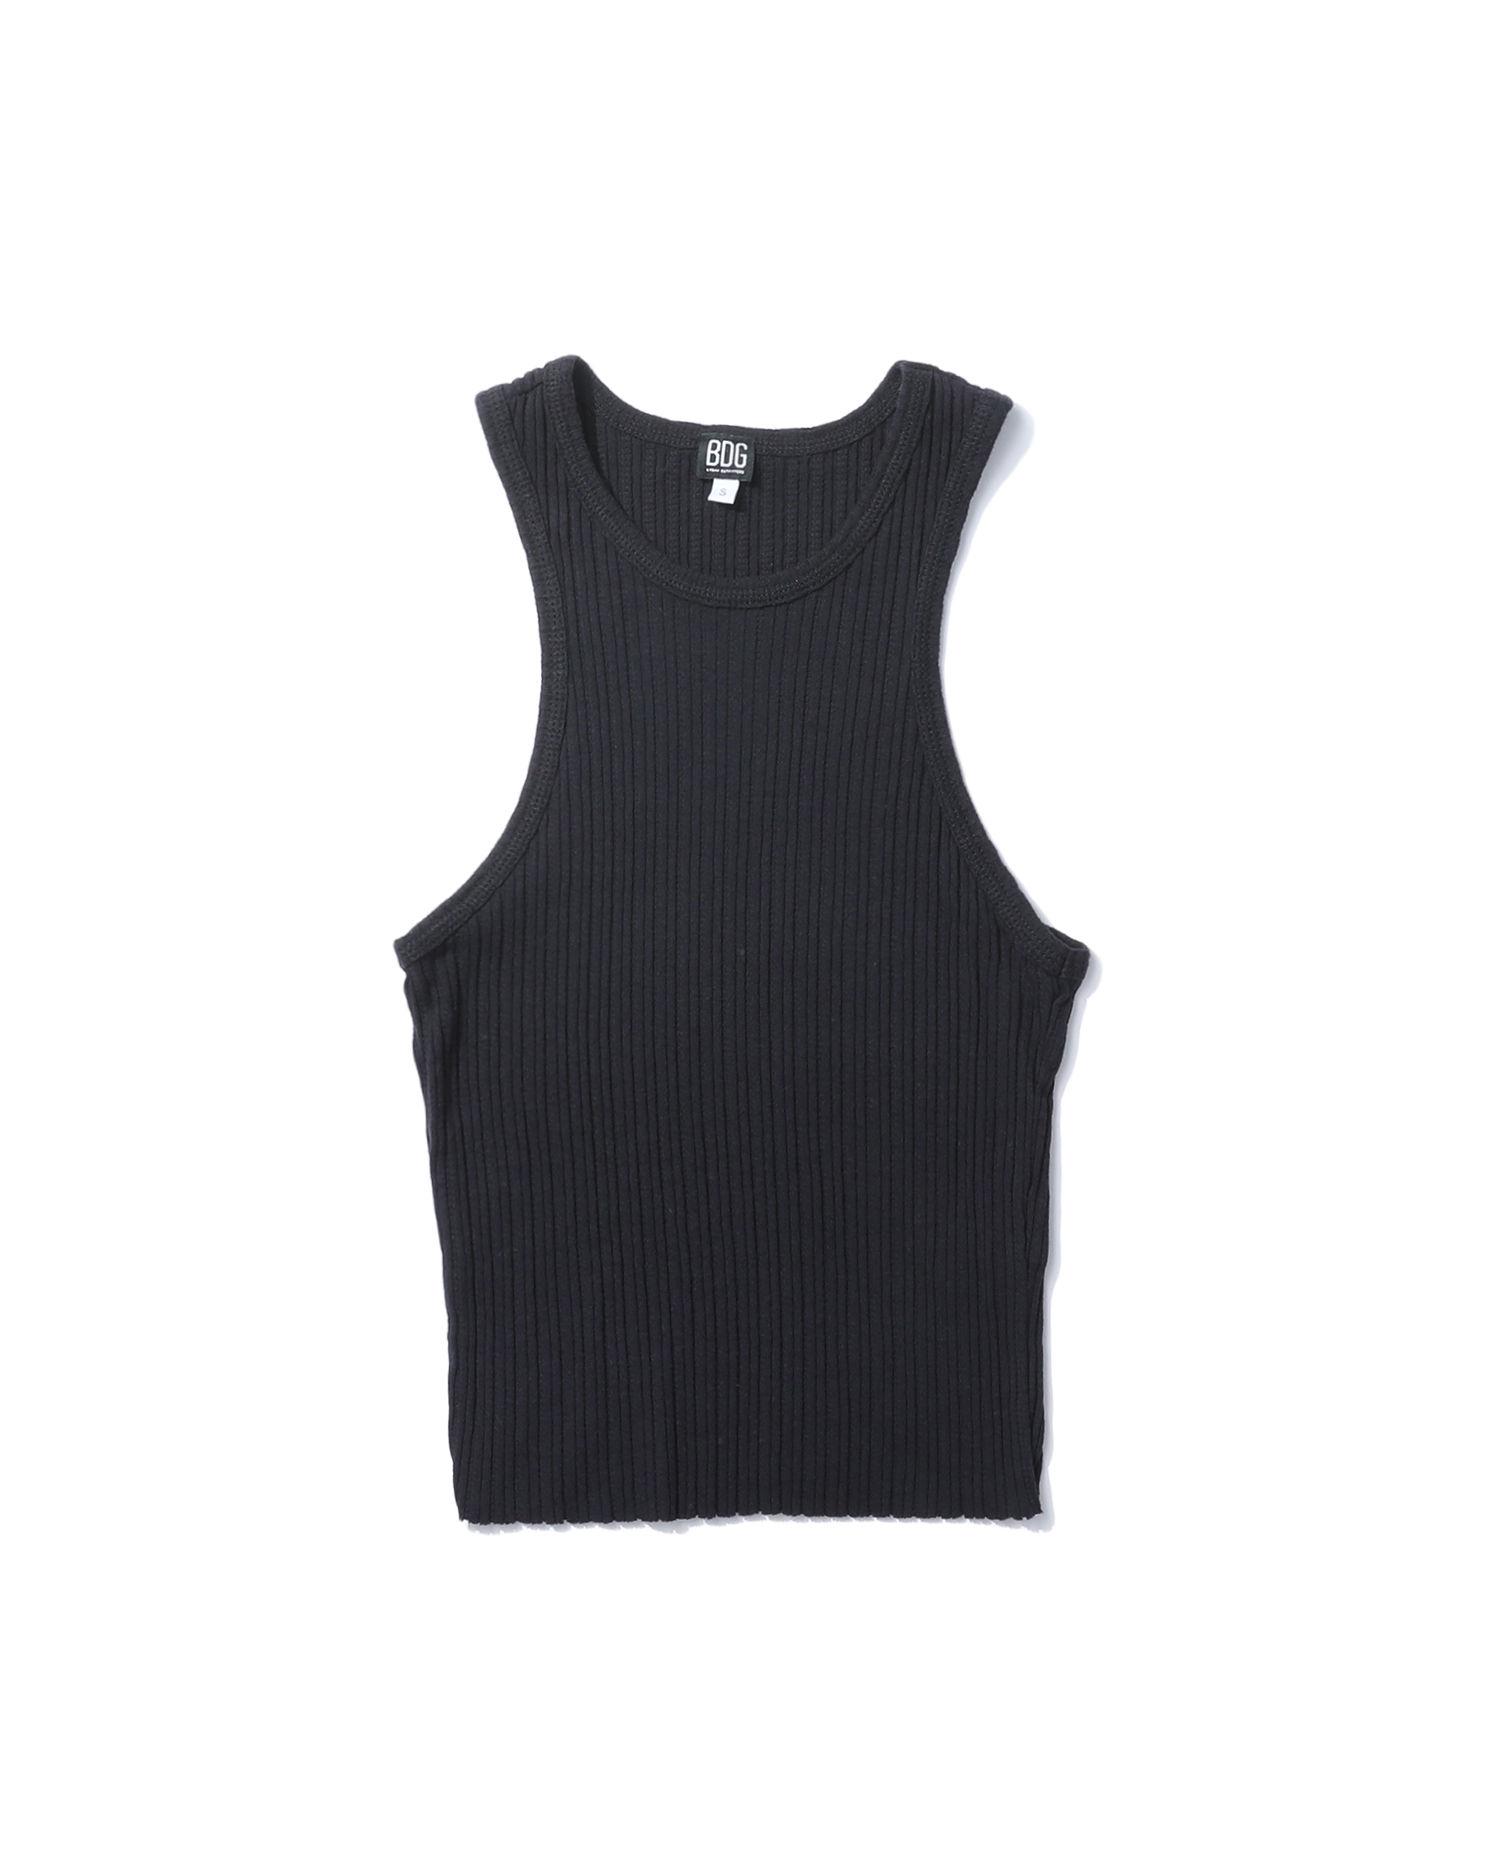 Ribbed tank top by BDG